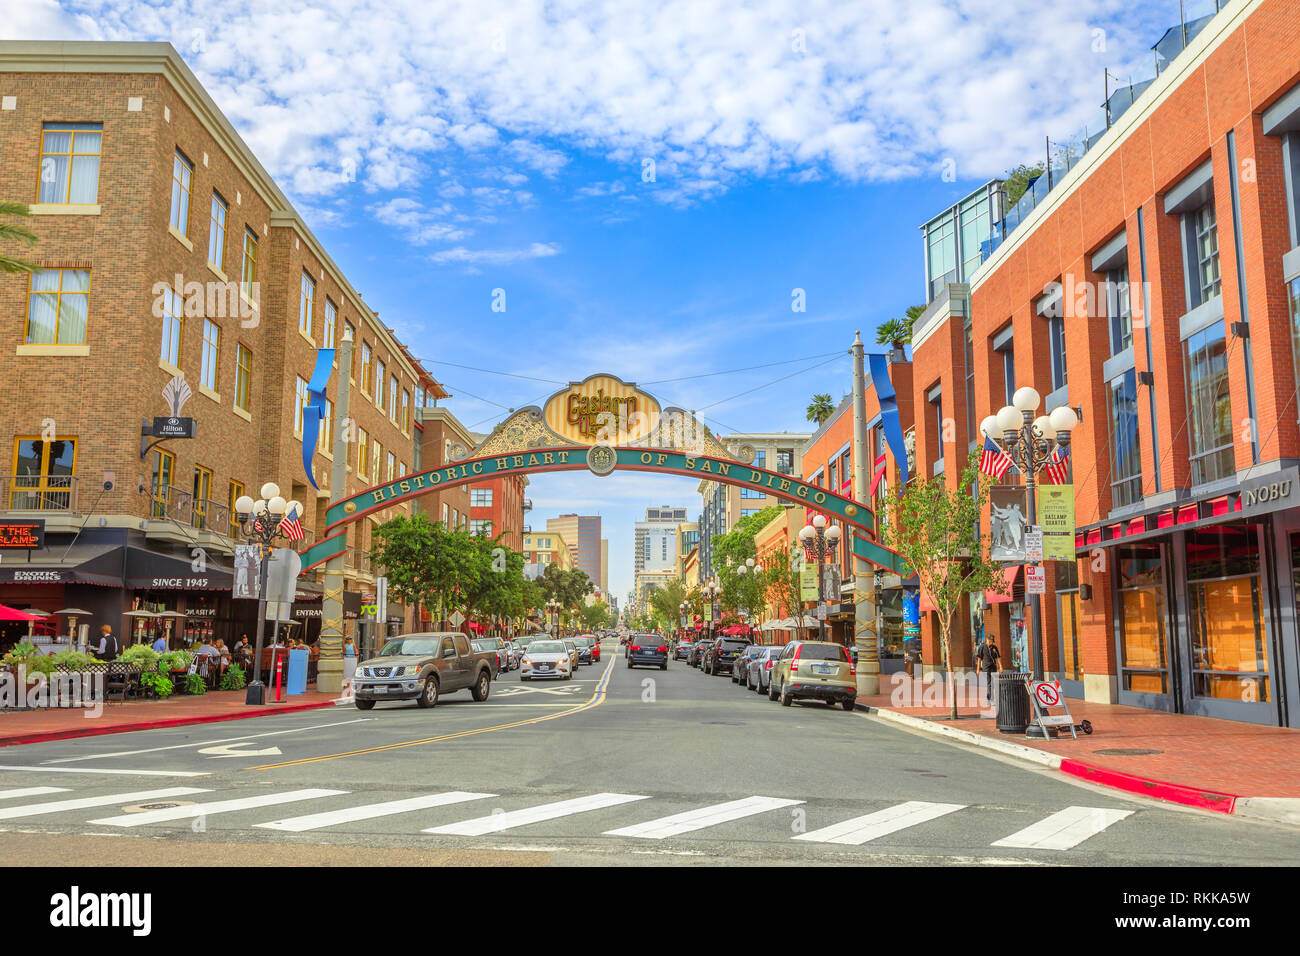 San Diego, California, United States - July 31, 2018: Historic Heart of San Diego sign of San Diego's Gaslamp Quarter in Downtown with Victorian archi Stock Photo